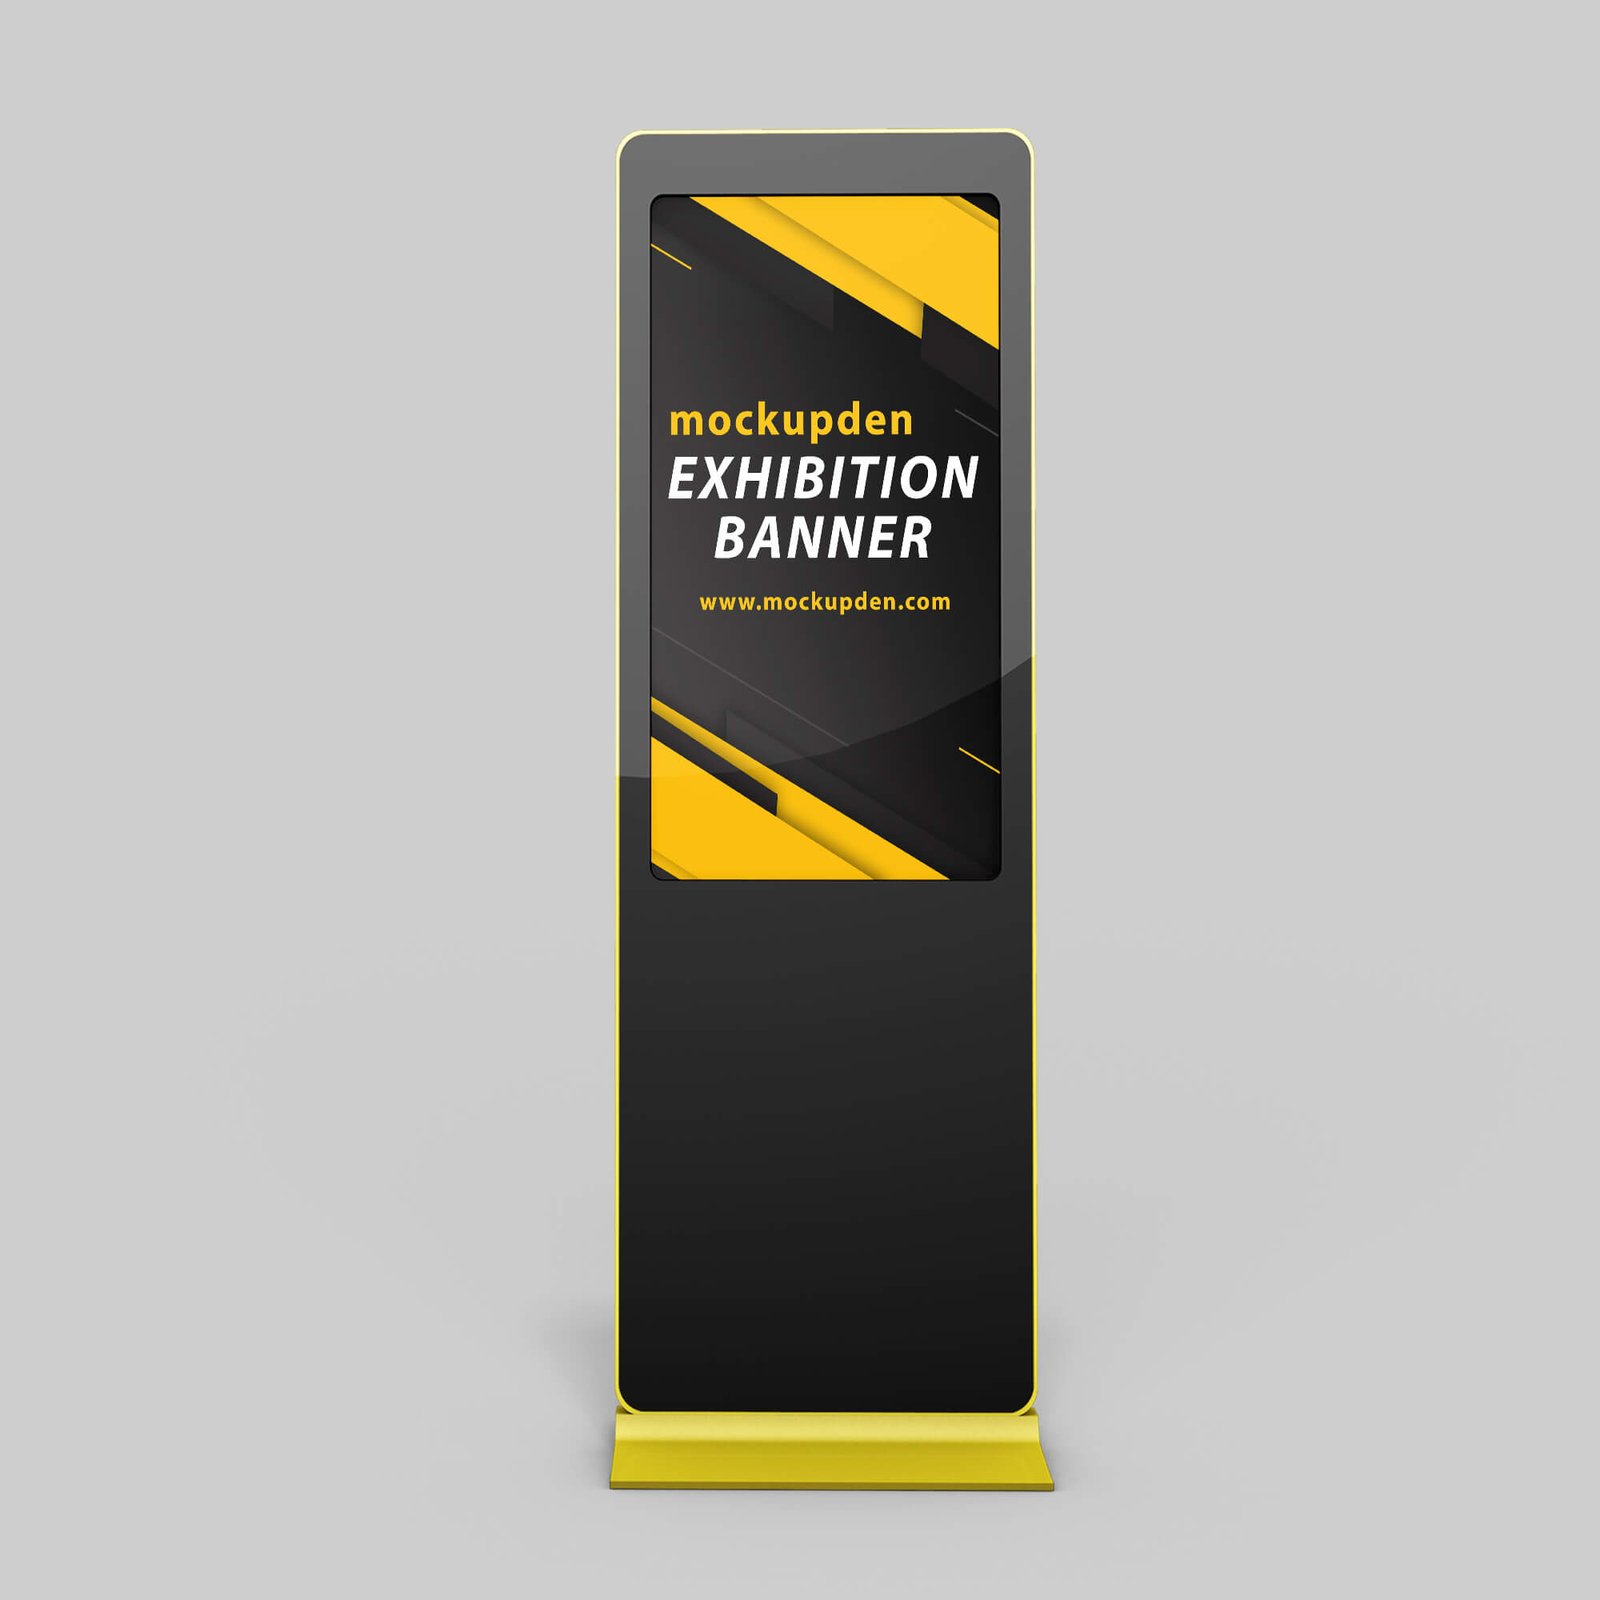 Design Free Exhibition Banner Mockup PSD Template